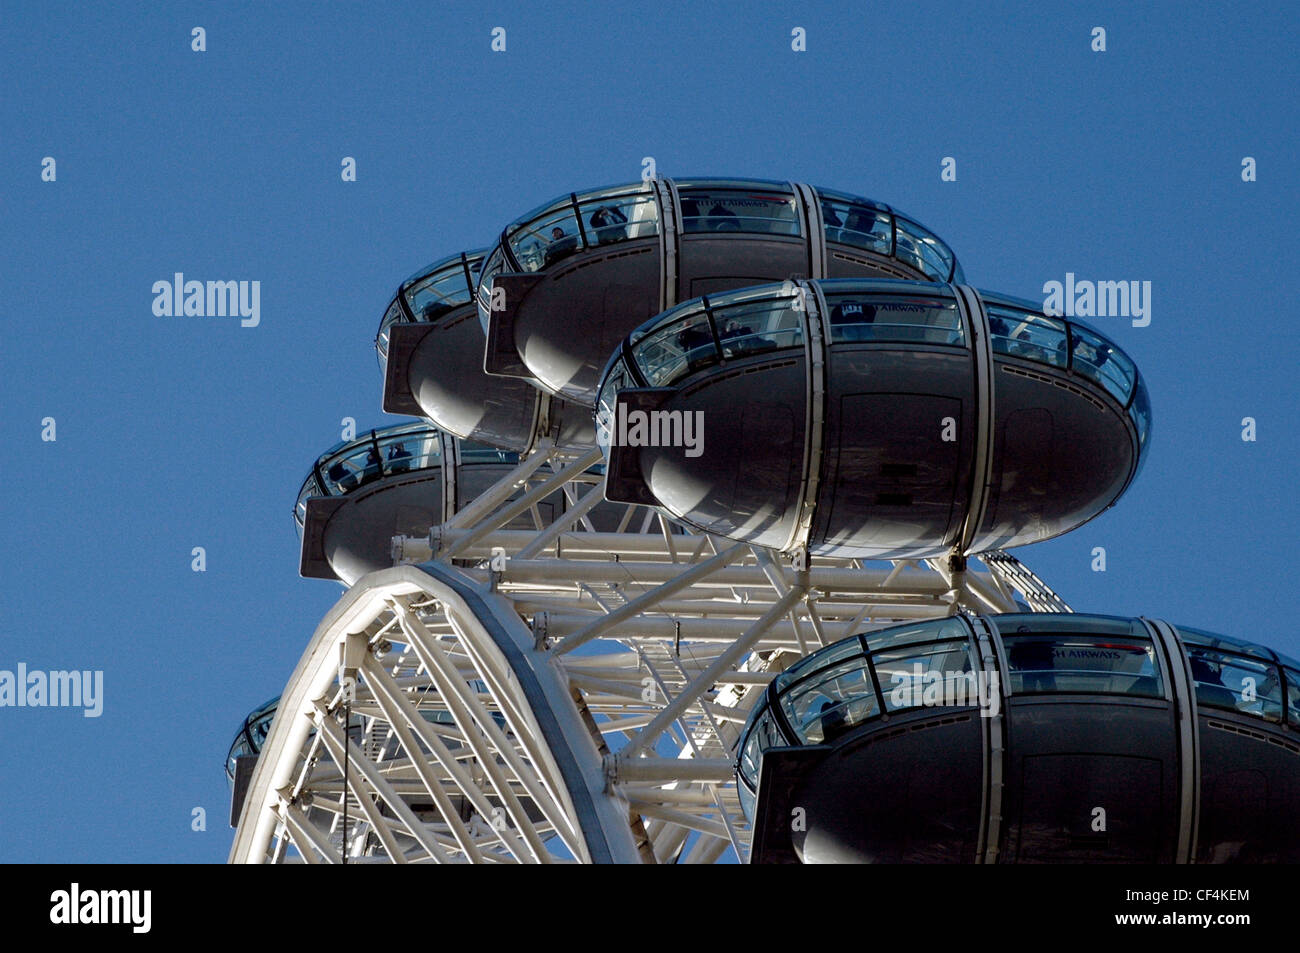 London Eye pods viewed from below. Opened in 1999, the Millennium Wheel is the largest observation wheel in the world. Stock Photo